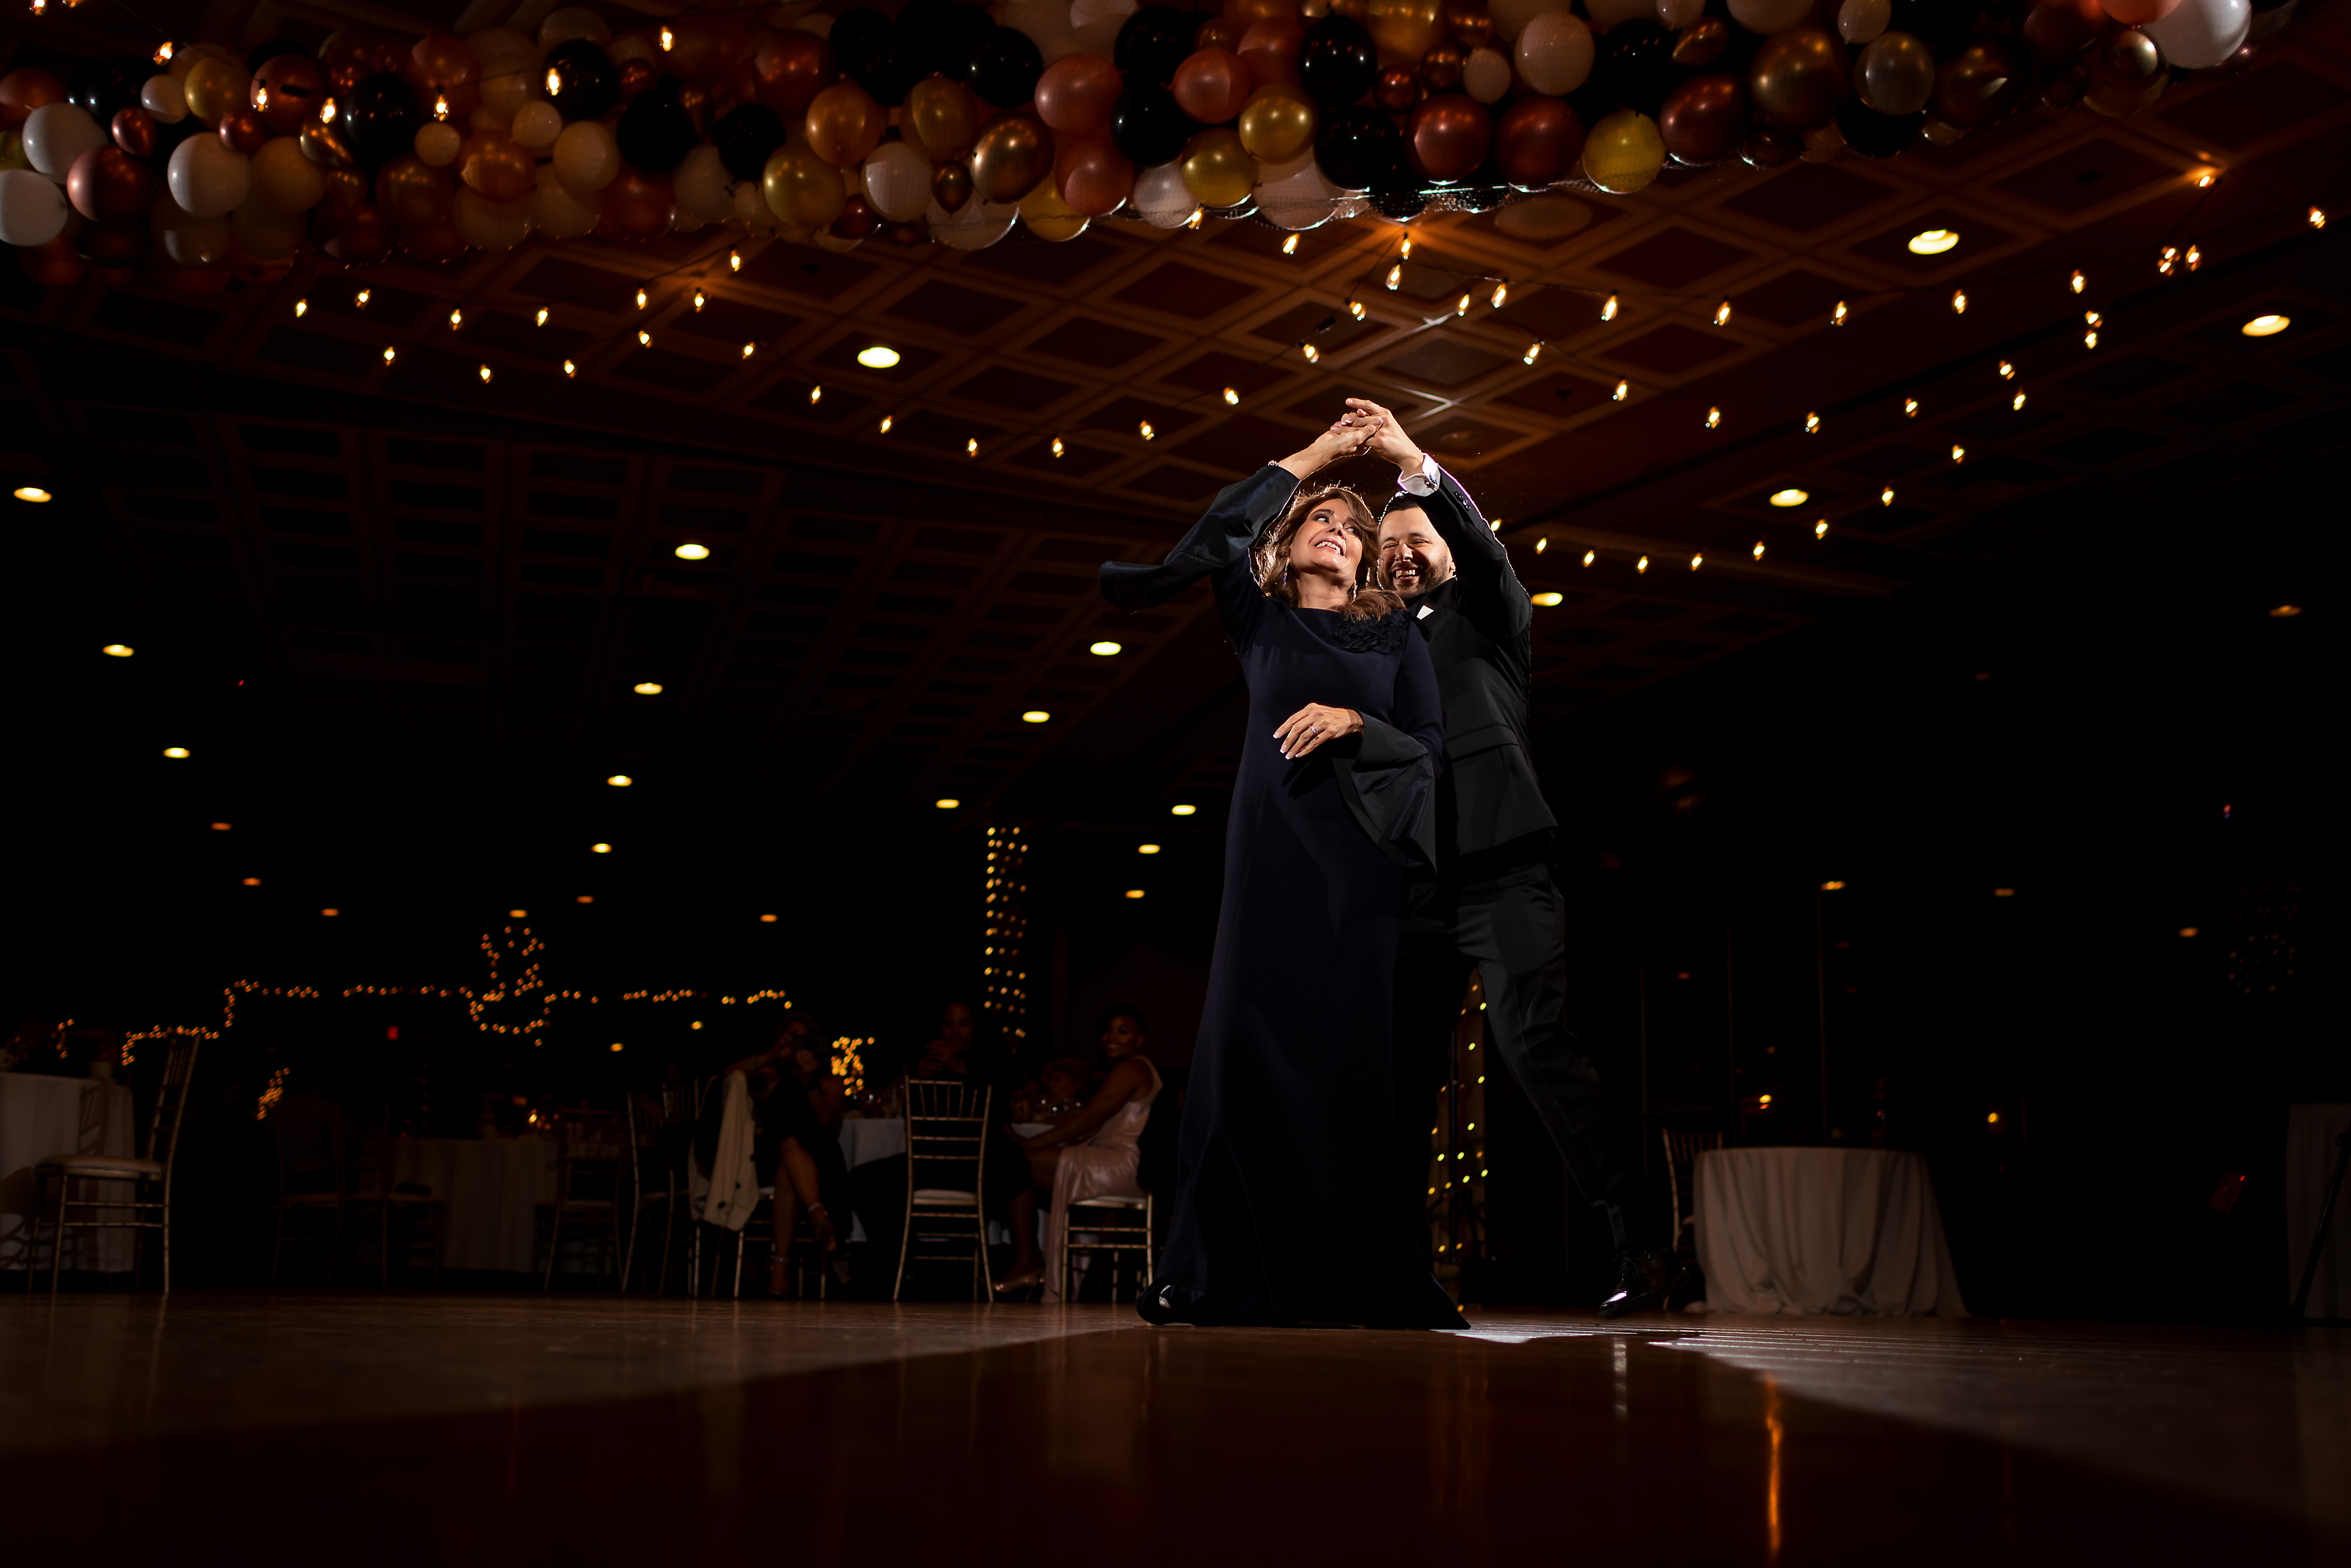 Groom dances with mom during wedding reception at Two Brothers Brewery in Aurora, Illinois